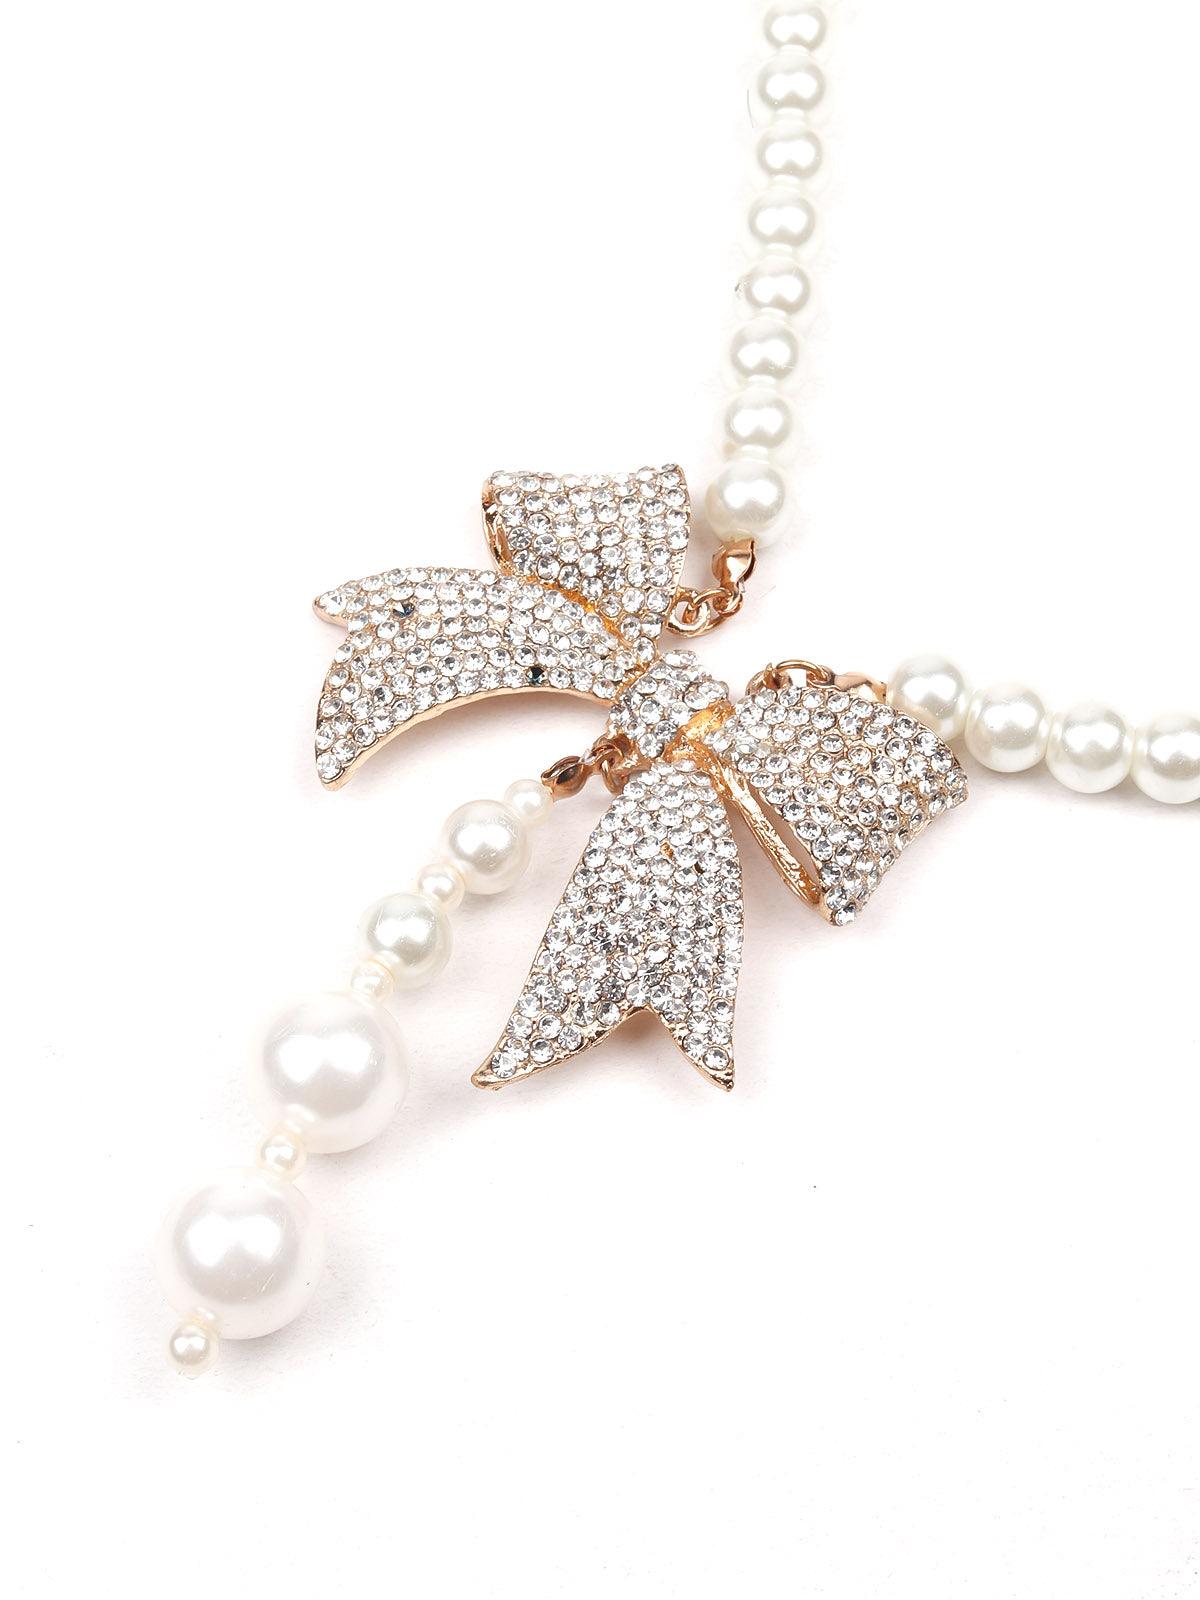 Elegant white necklace with studded bow pendant - Odette